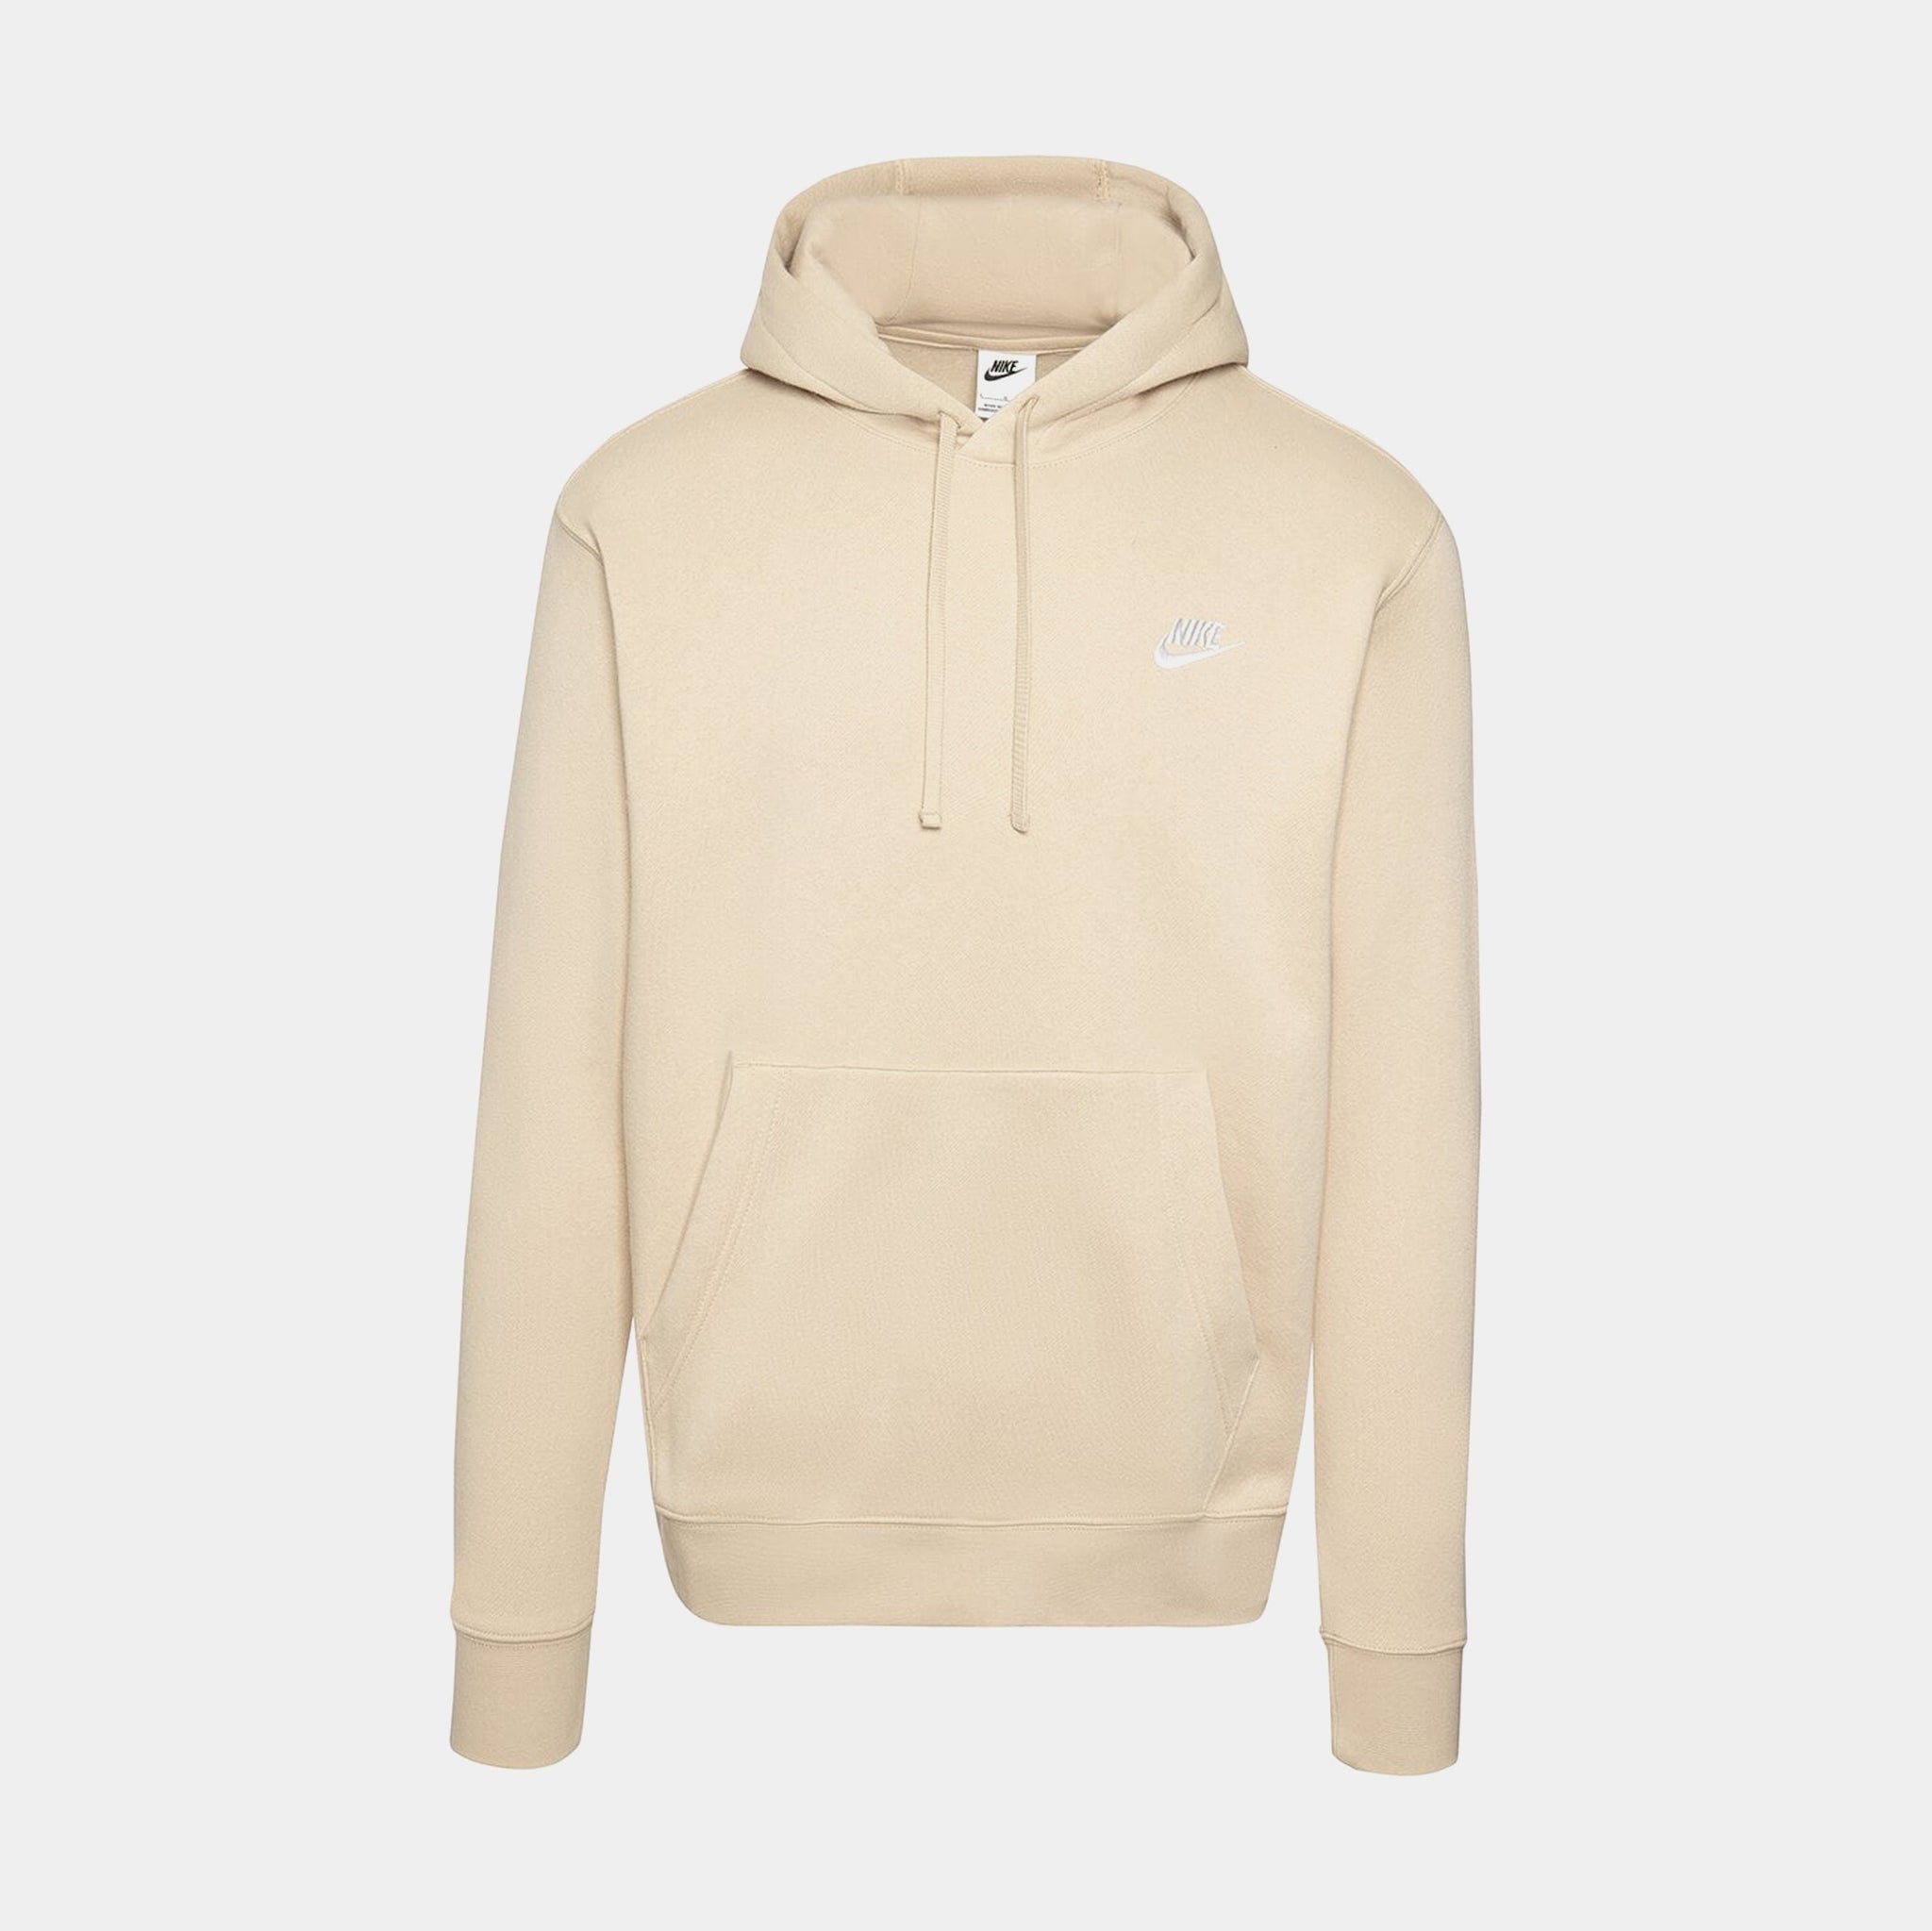 Men's Nike Team Club Pullover Hoodie - Courtside Fort Worth — Courtside 360